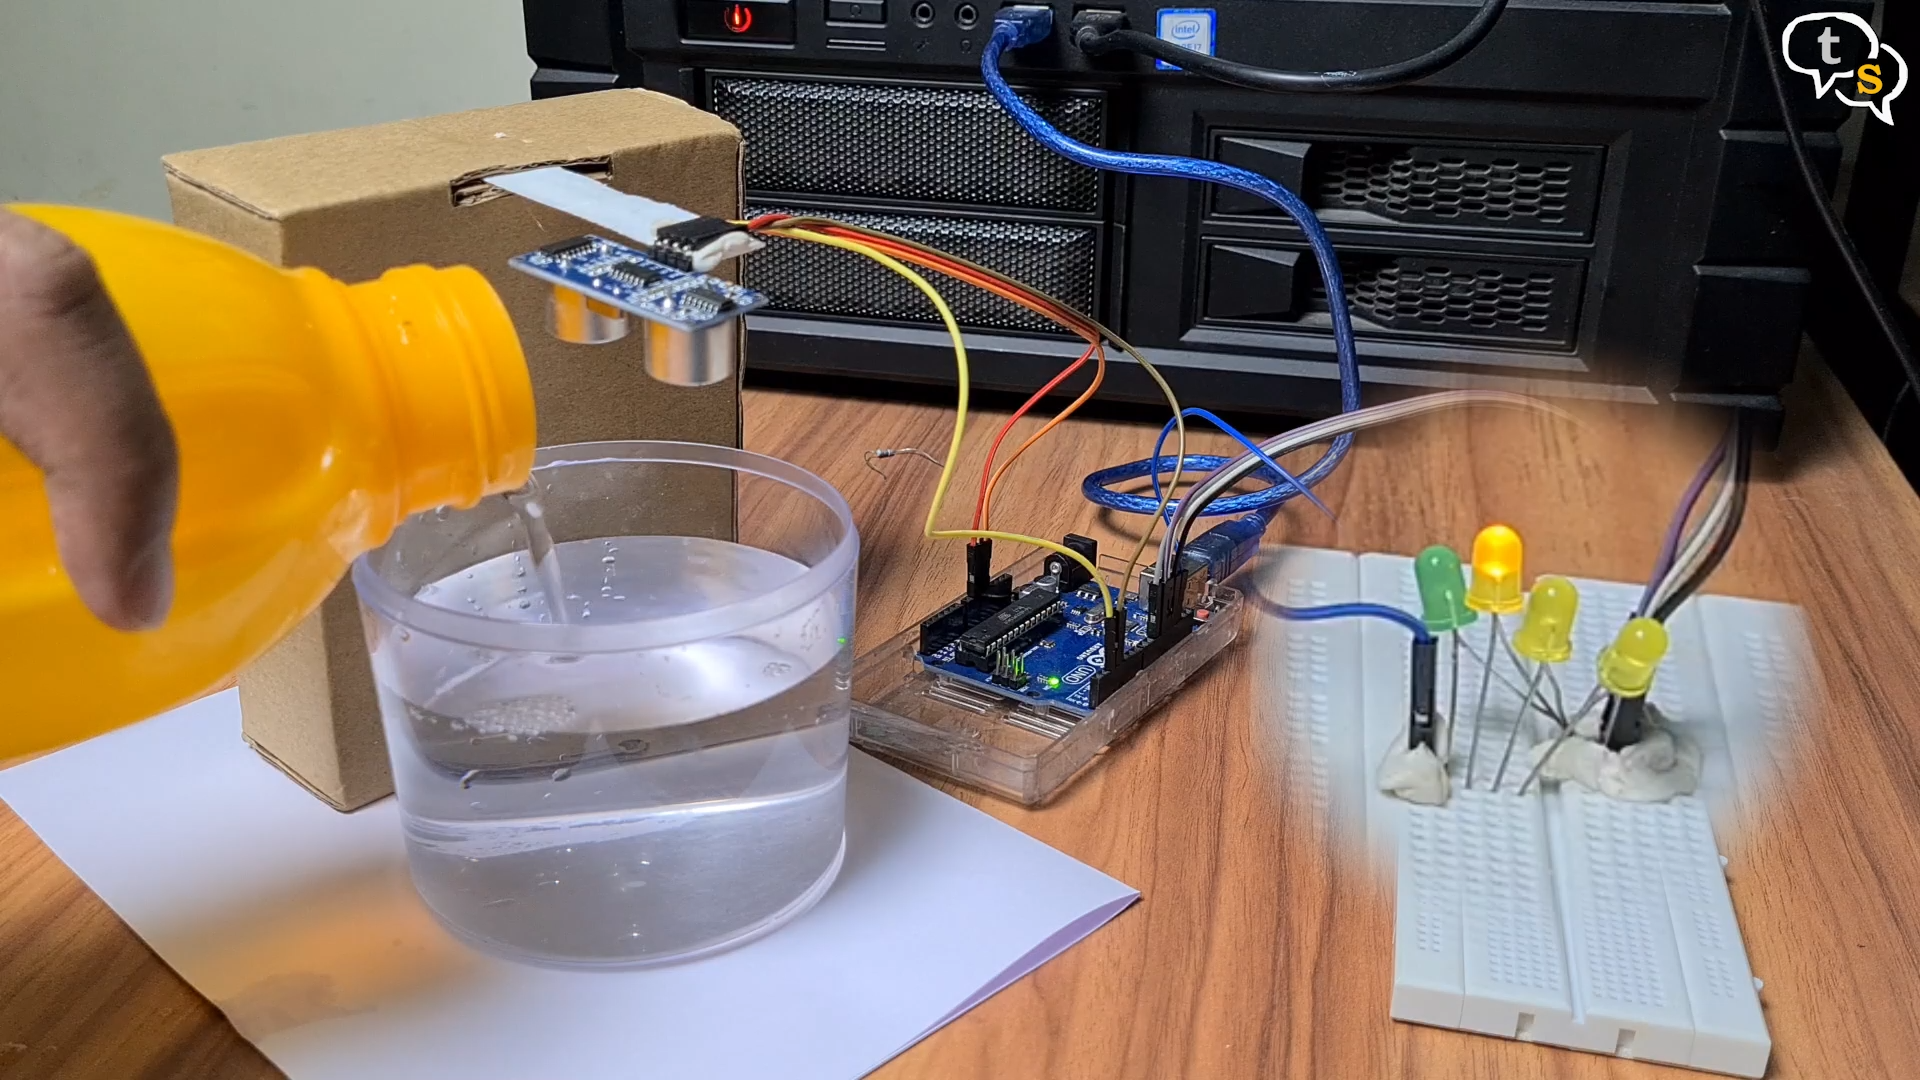 Testing if the Ultrasonic sensor is changing values with water level in a Jar